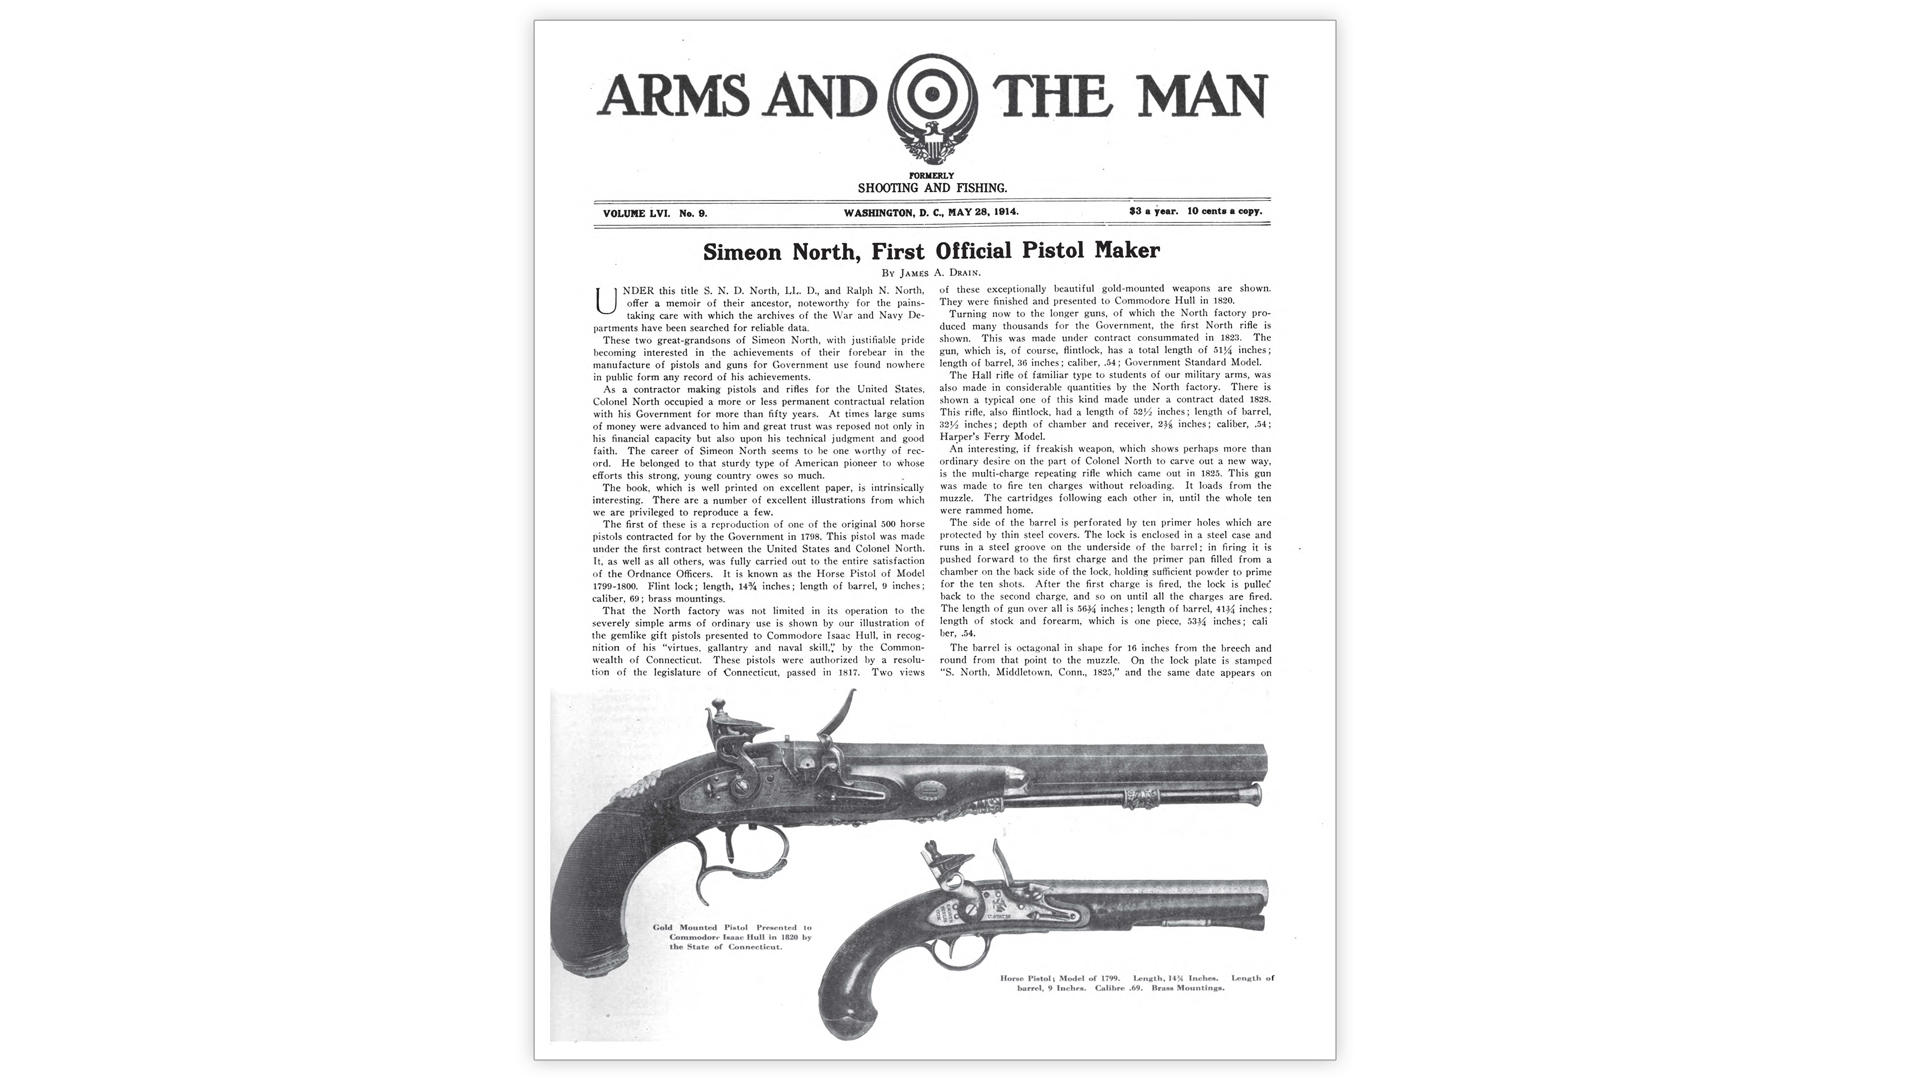 ARMS AND THE MAN May 28, 1914 newsletter text on image with flintlock pistols